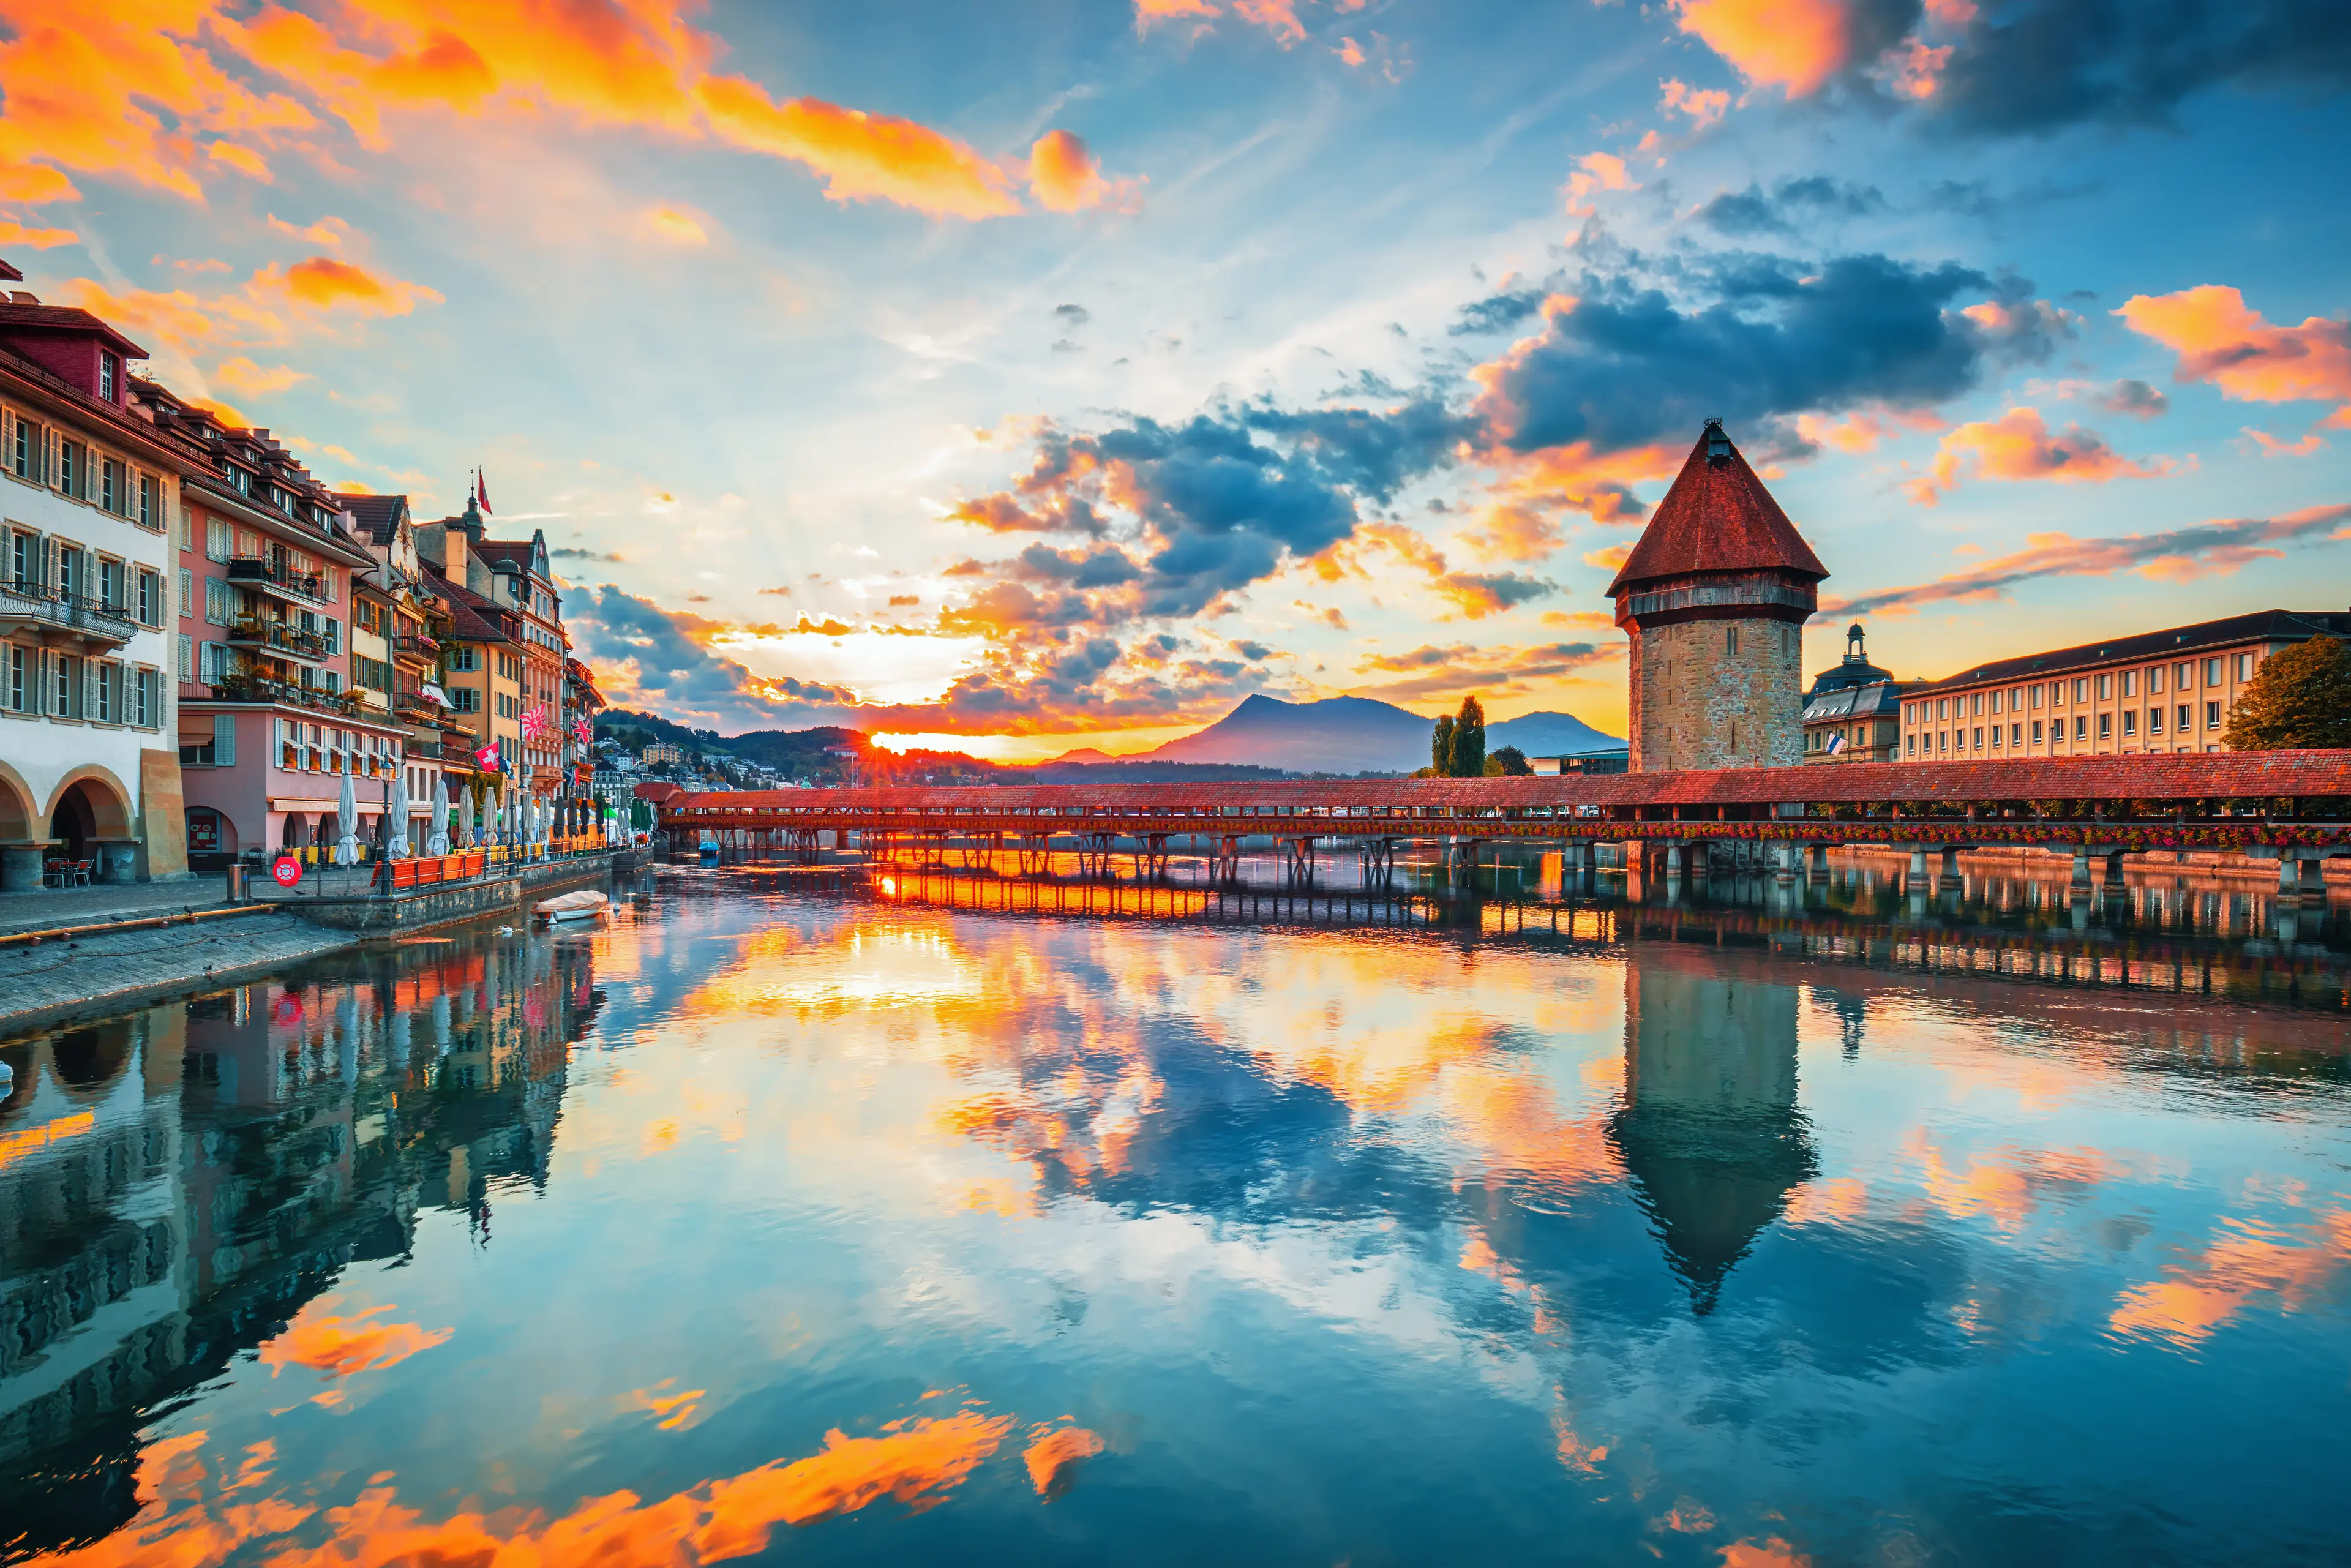 2-Day Ultimate Travel Guide to Lucerne, Switzerland